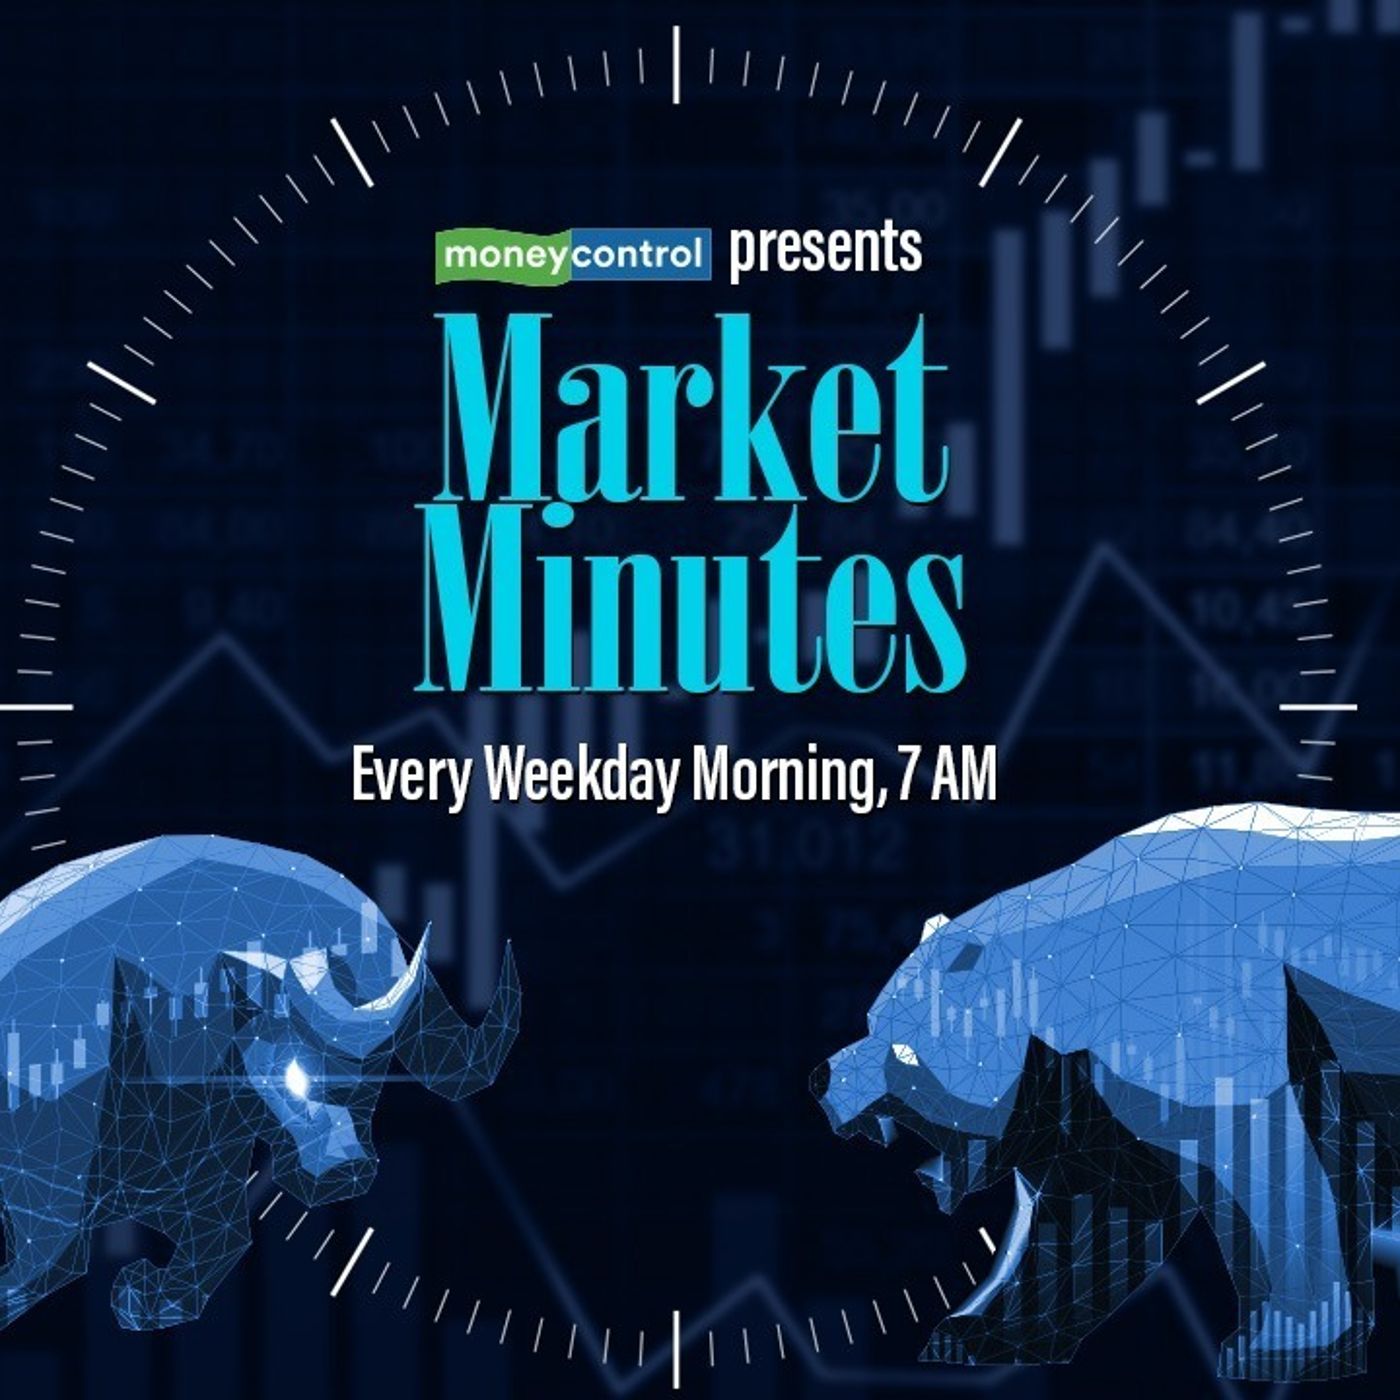 4246: Will the fall stop for Indian benchmarks after 5 days of selloff? Market Minutes